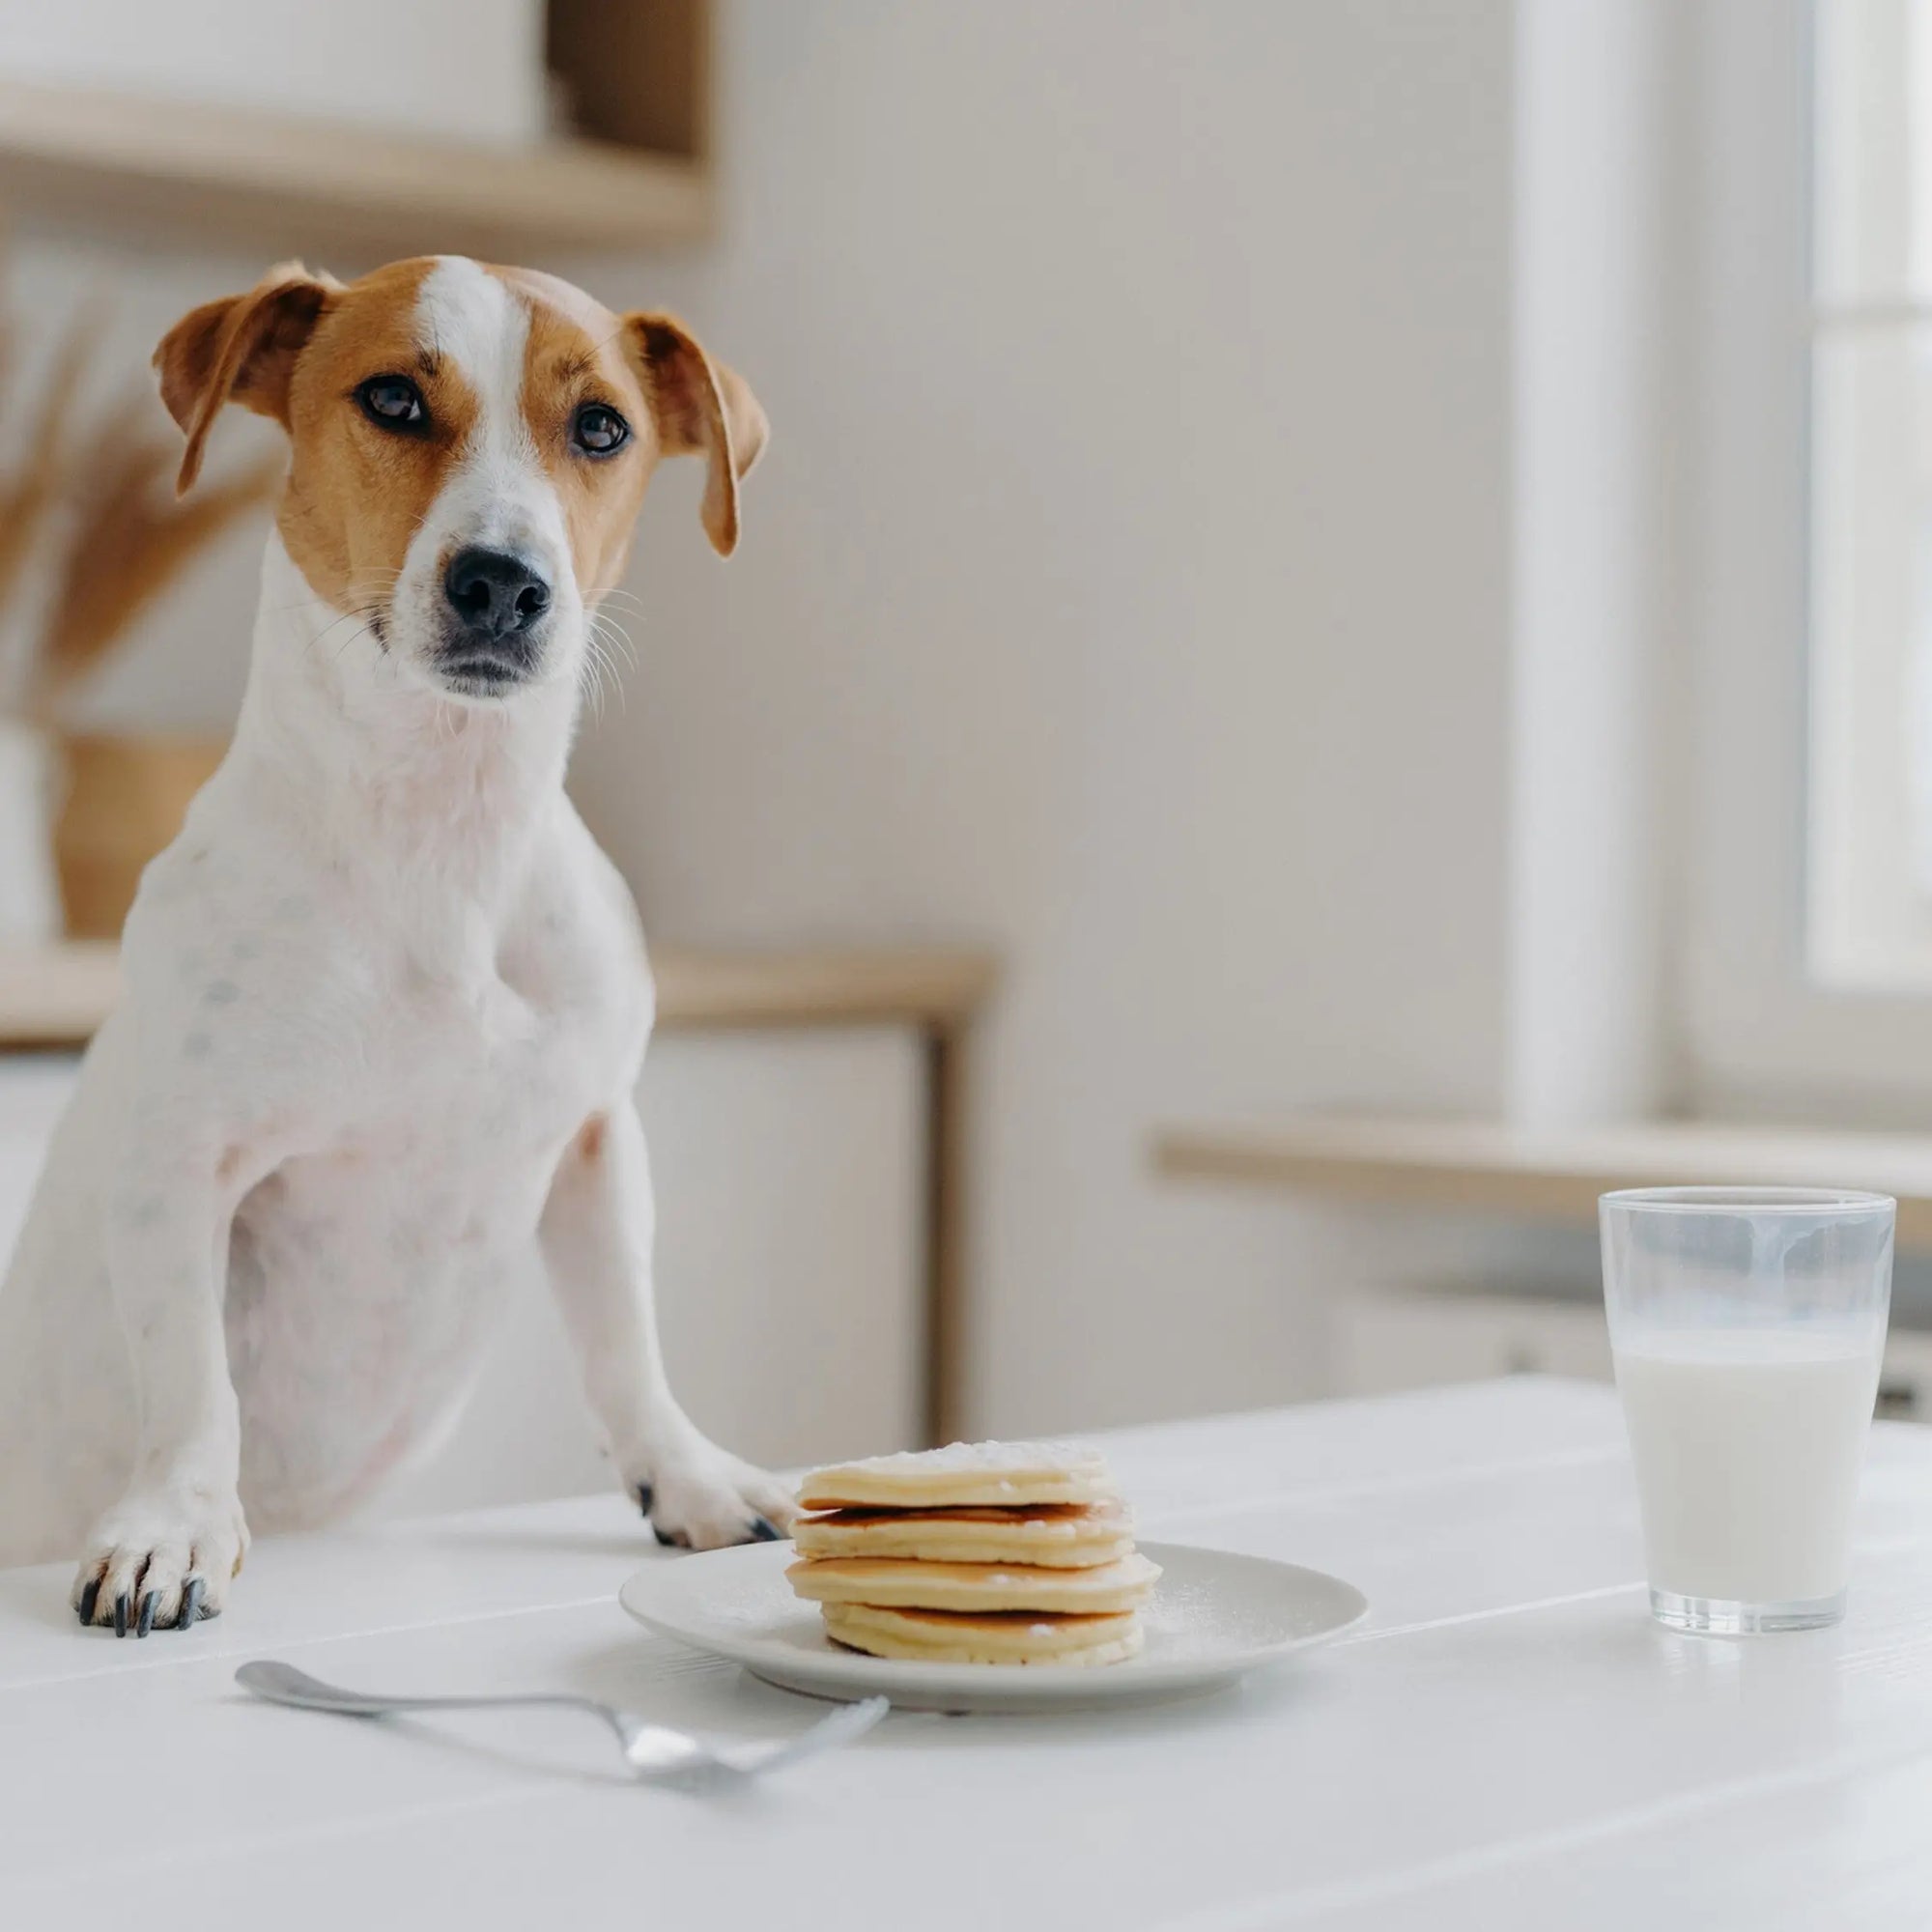 Can Dogs Have Almond Milk, Oat Milk, Coconut Milk or Soy Milk? - Dog Child